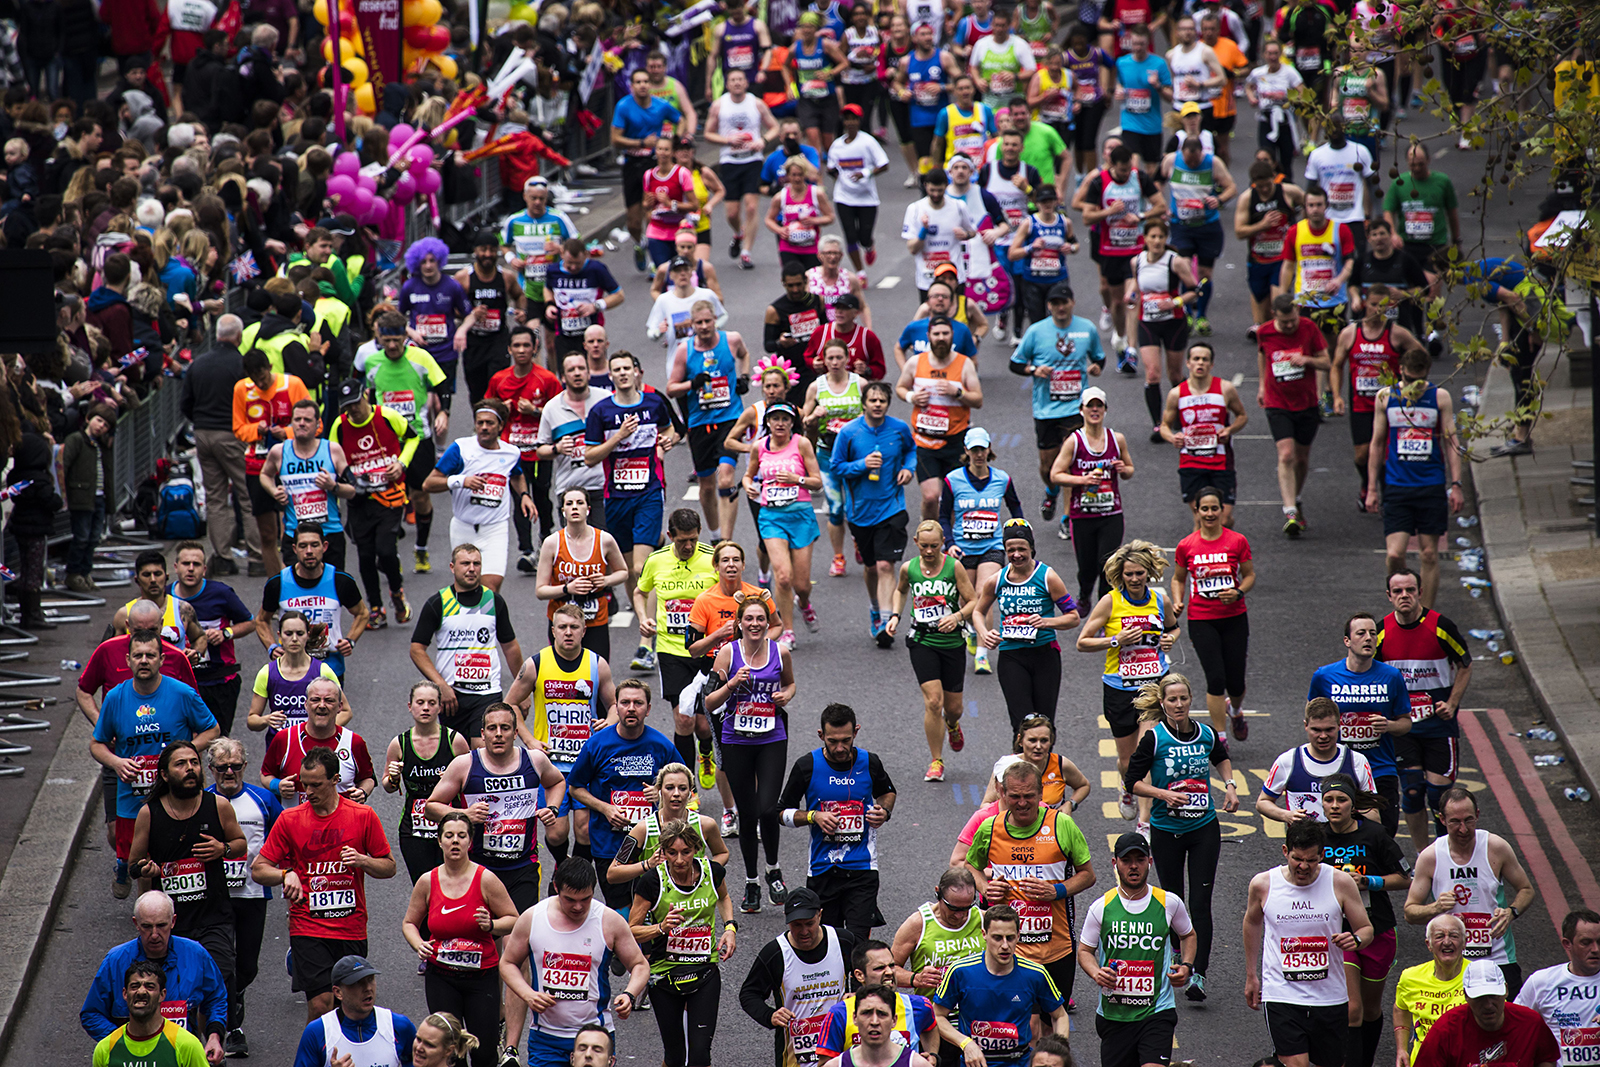 Sporting events such as city marathons are a favored target of terrorist attacks.